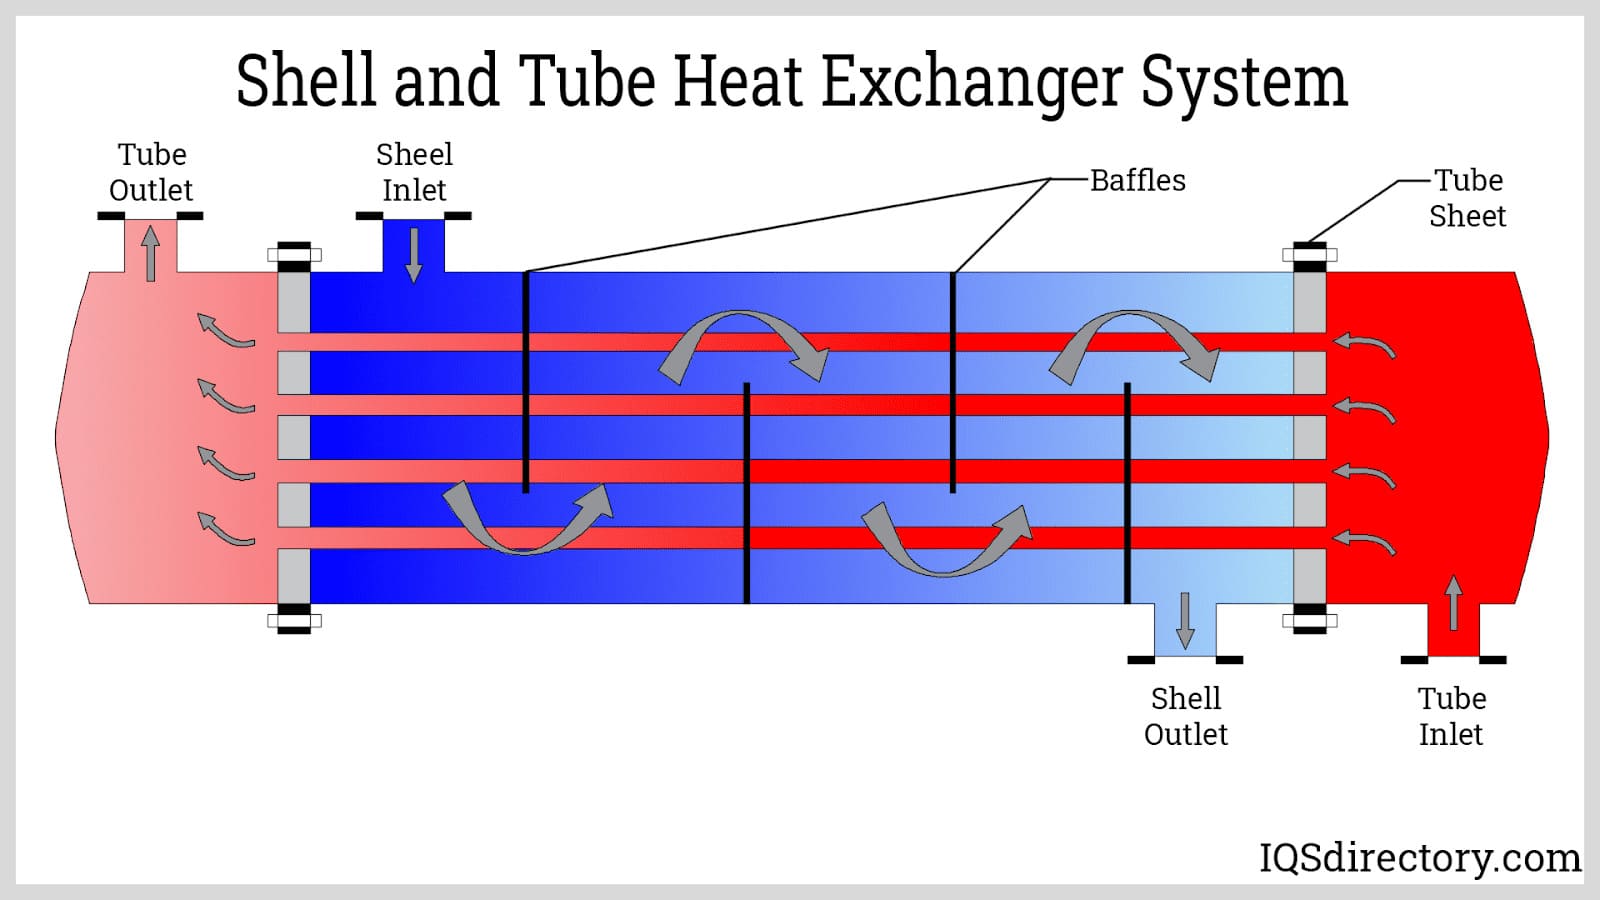 Shell and Tube Heat Exchanger System